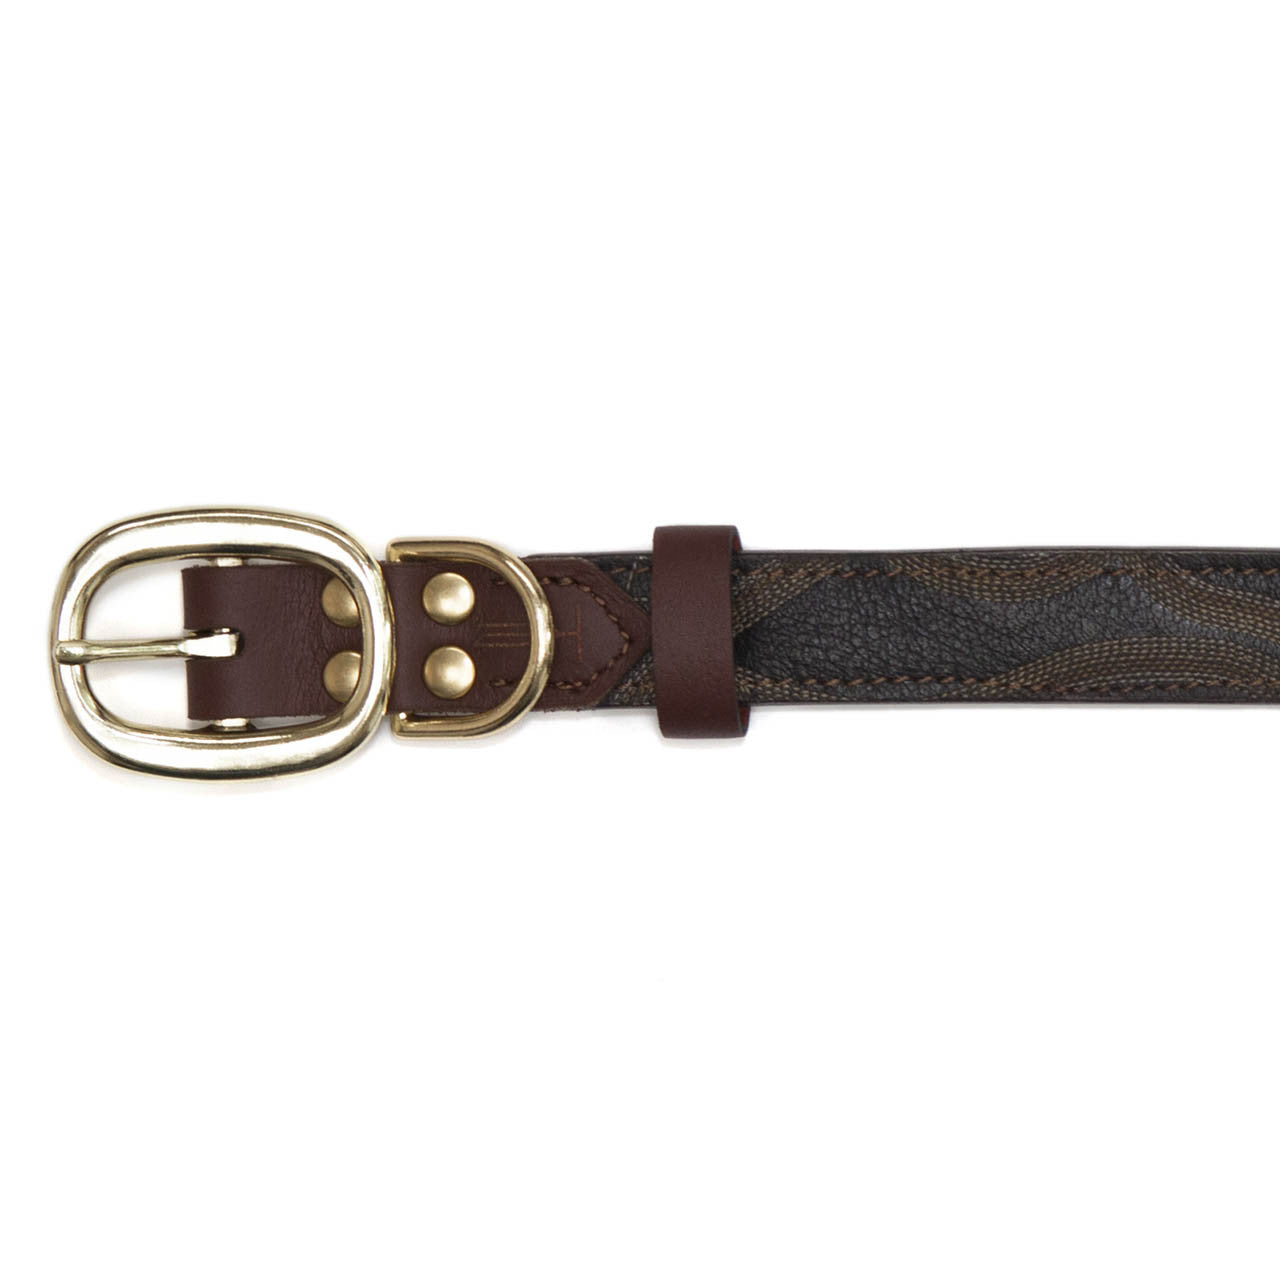 Mahogany Brown Dog Collar with Black Leather + Tan/Light Brown Stitching (buckle)